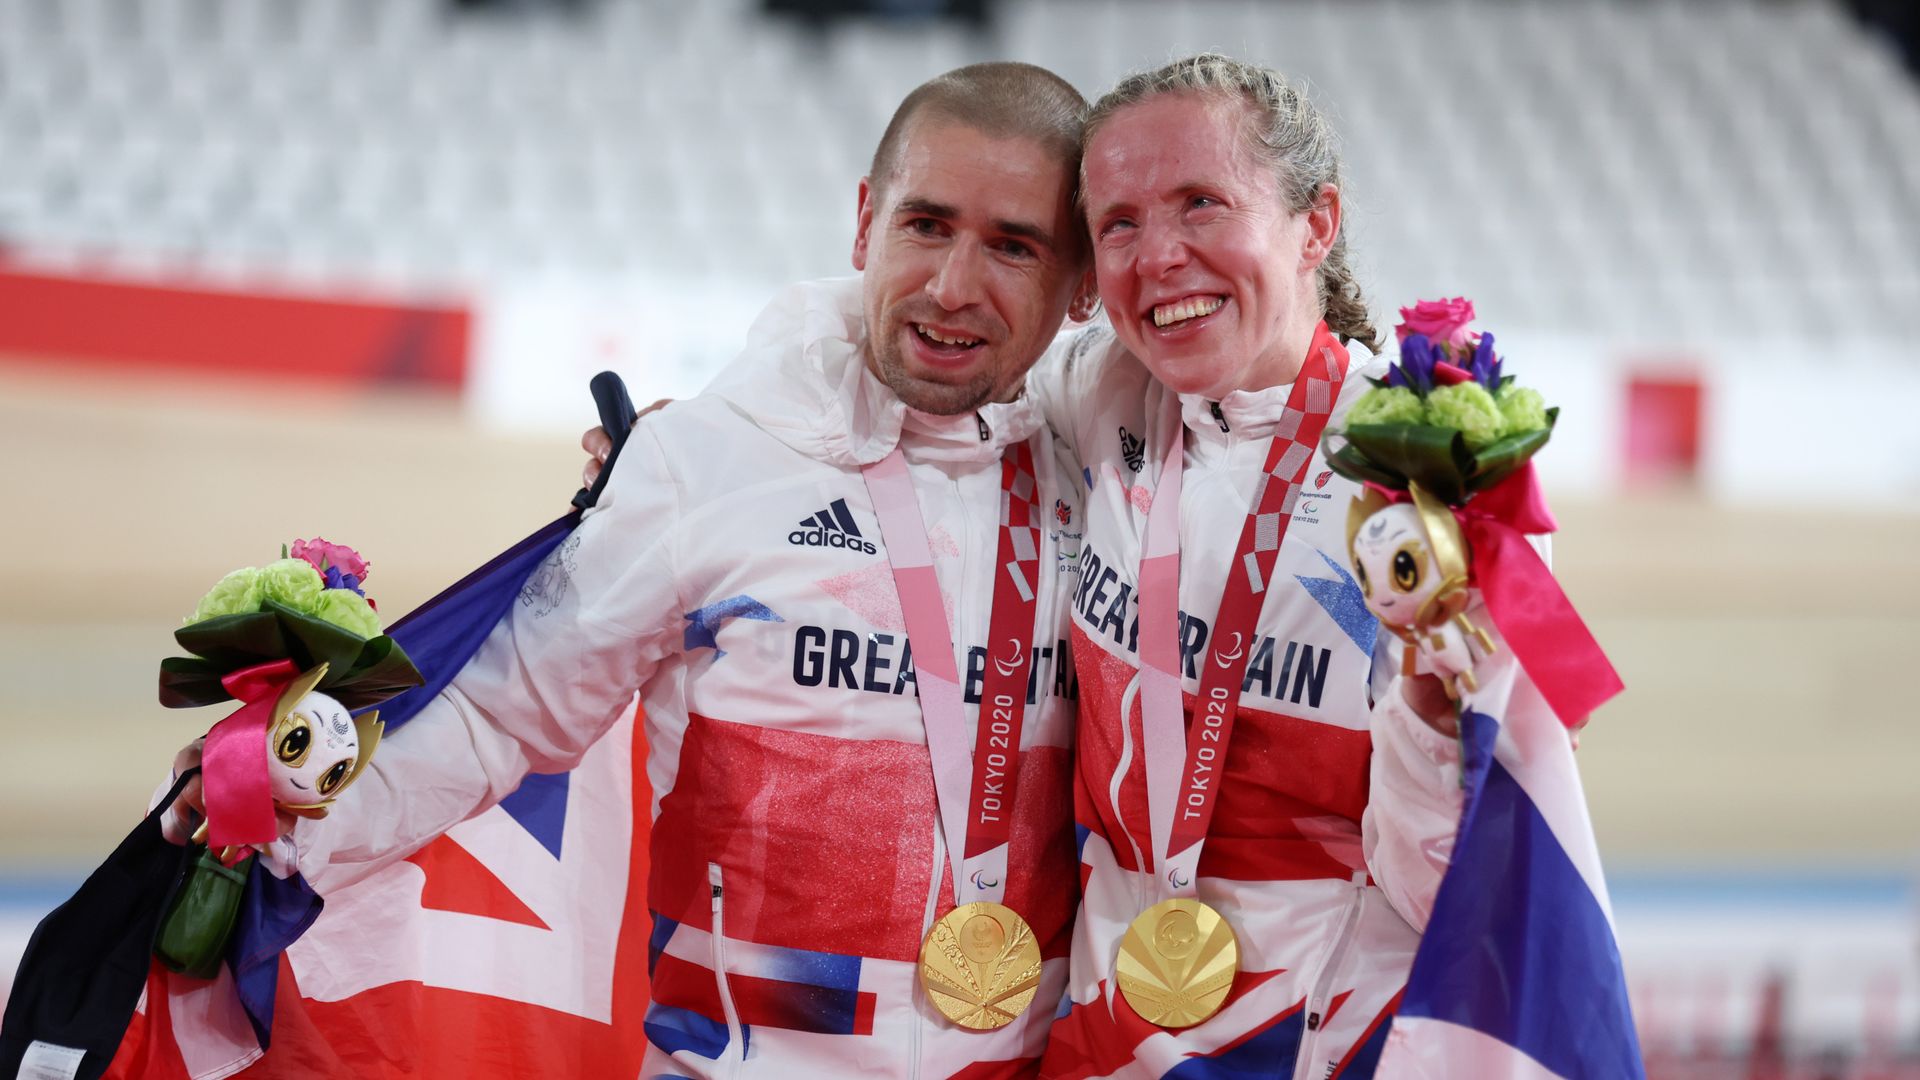 Husband and wife, Neil and Lora Fachie, win golds in world-record times